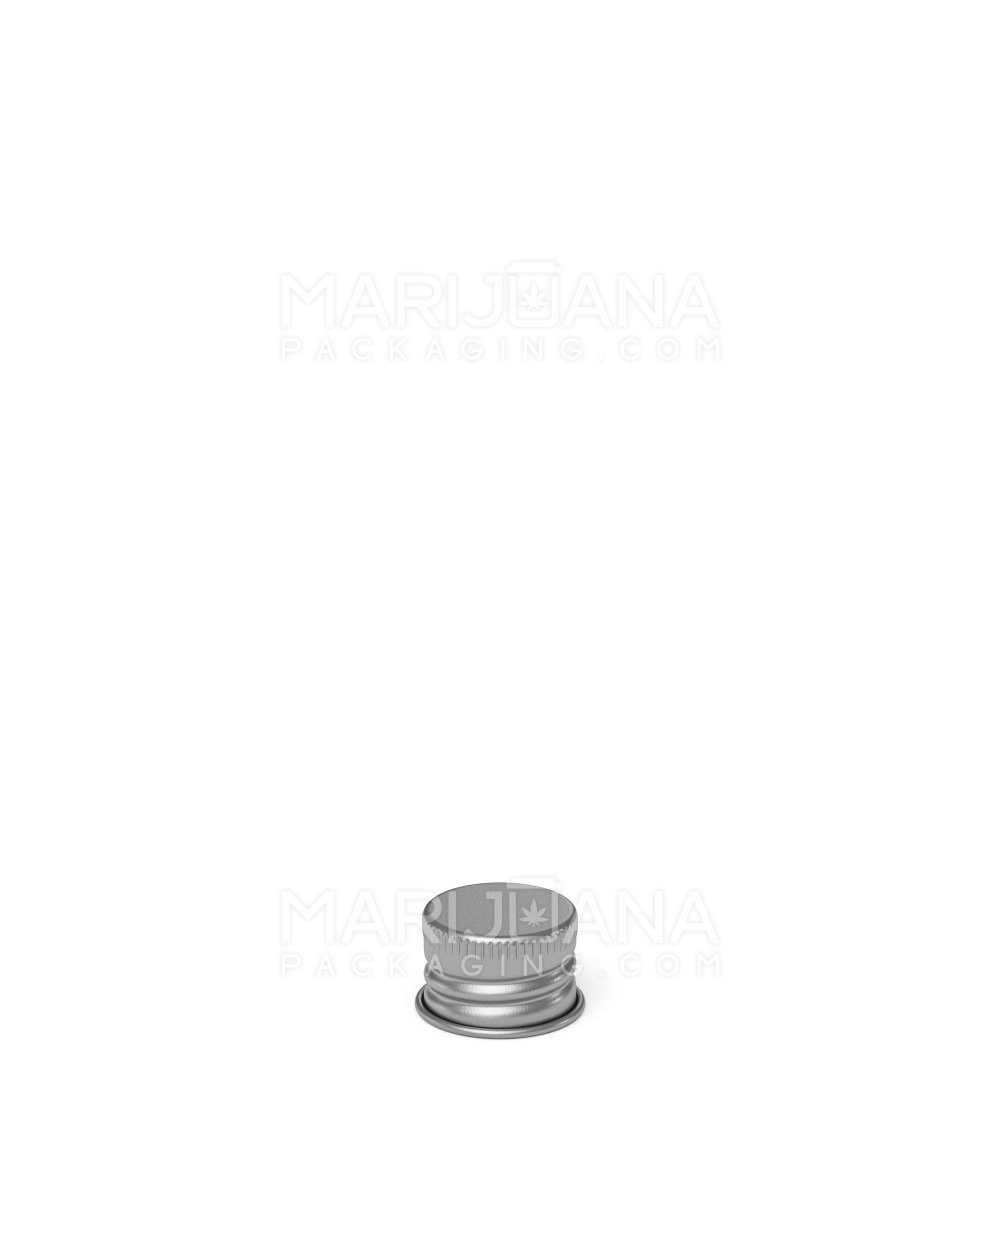 Ribbed Screw Top Metal Caps w/ Foam Liner | 18mm - Glossy Silver - 400 Count - 3